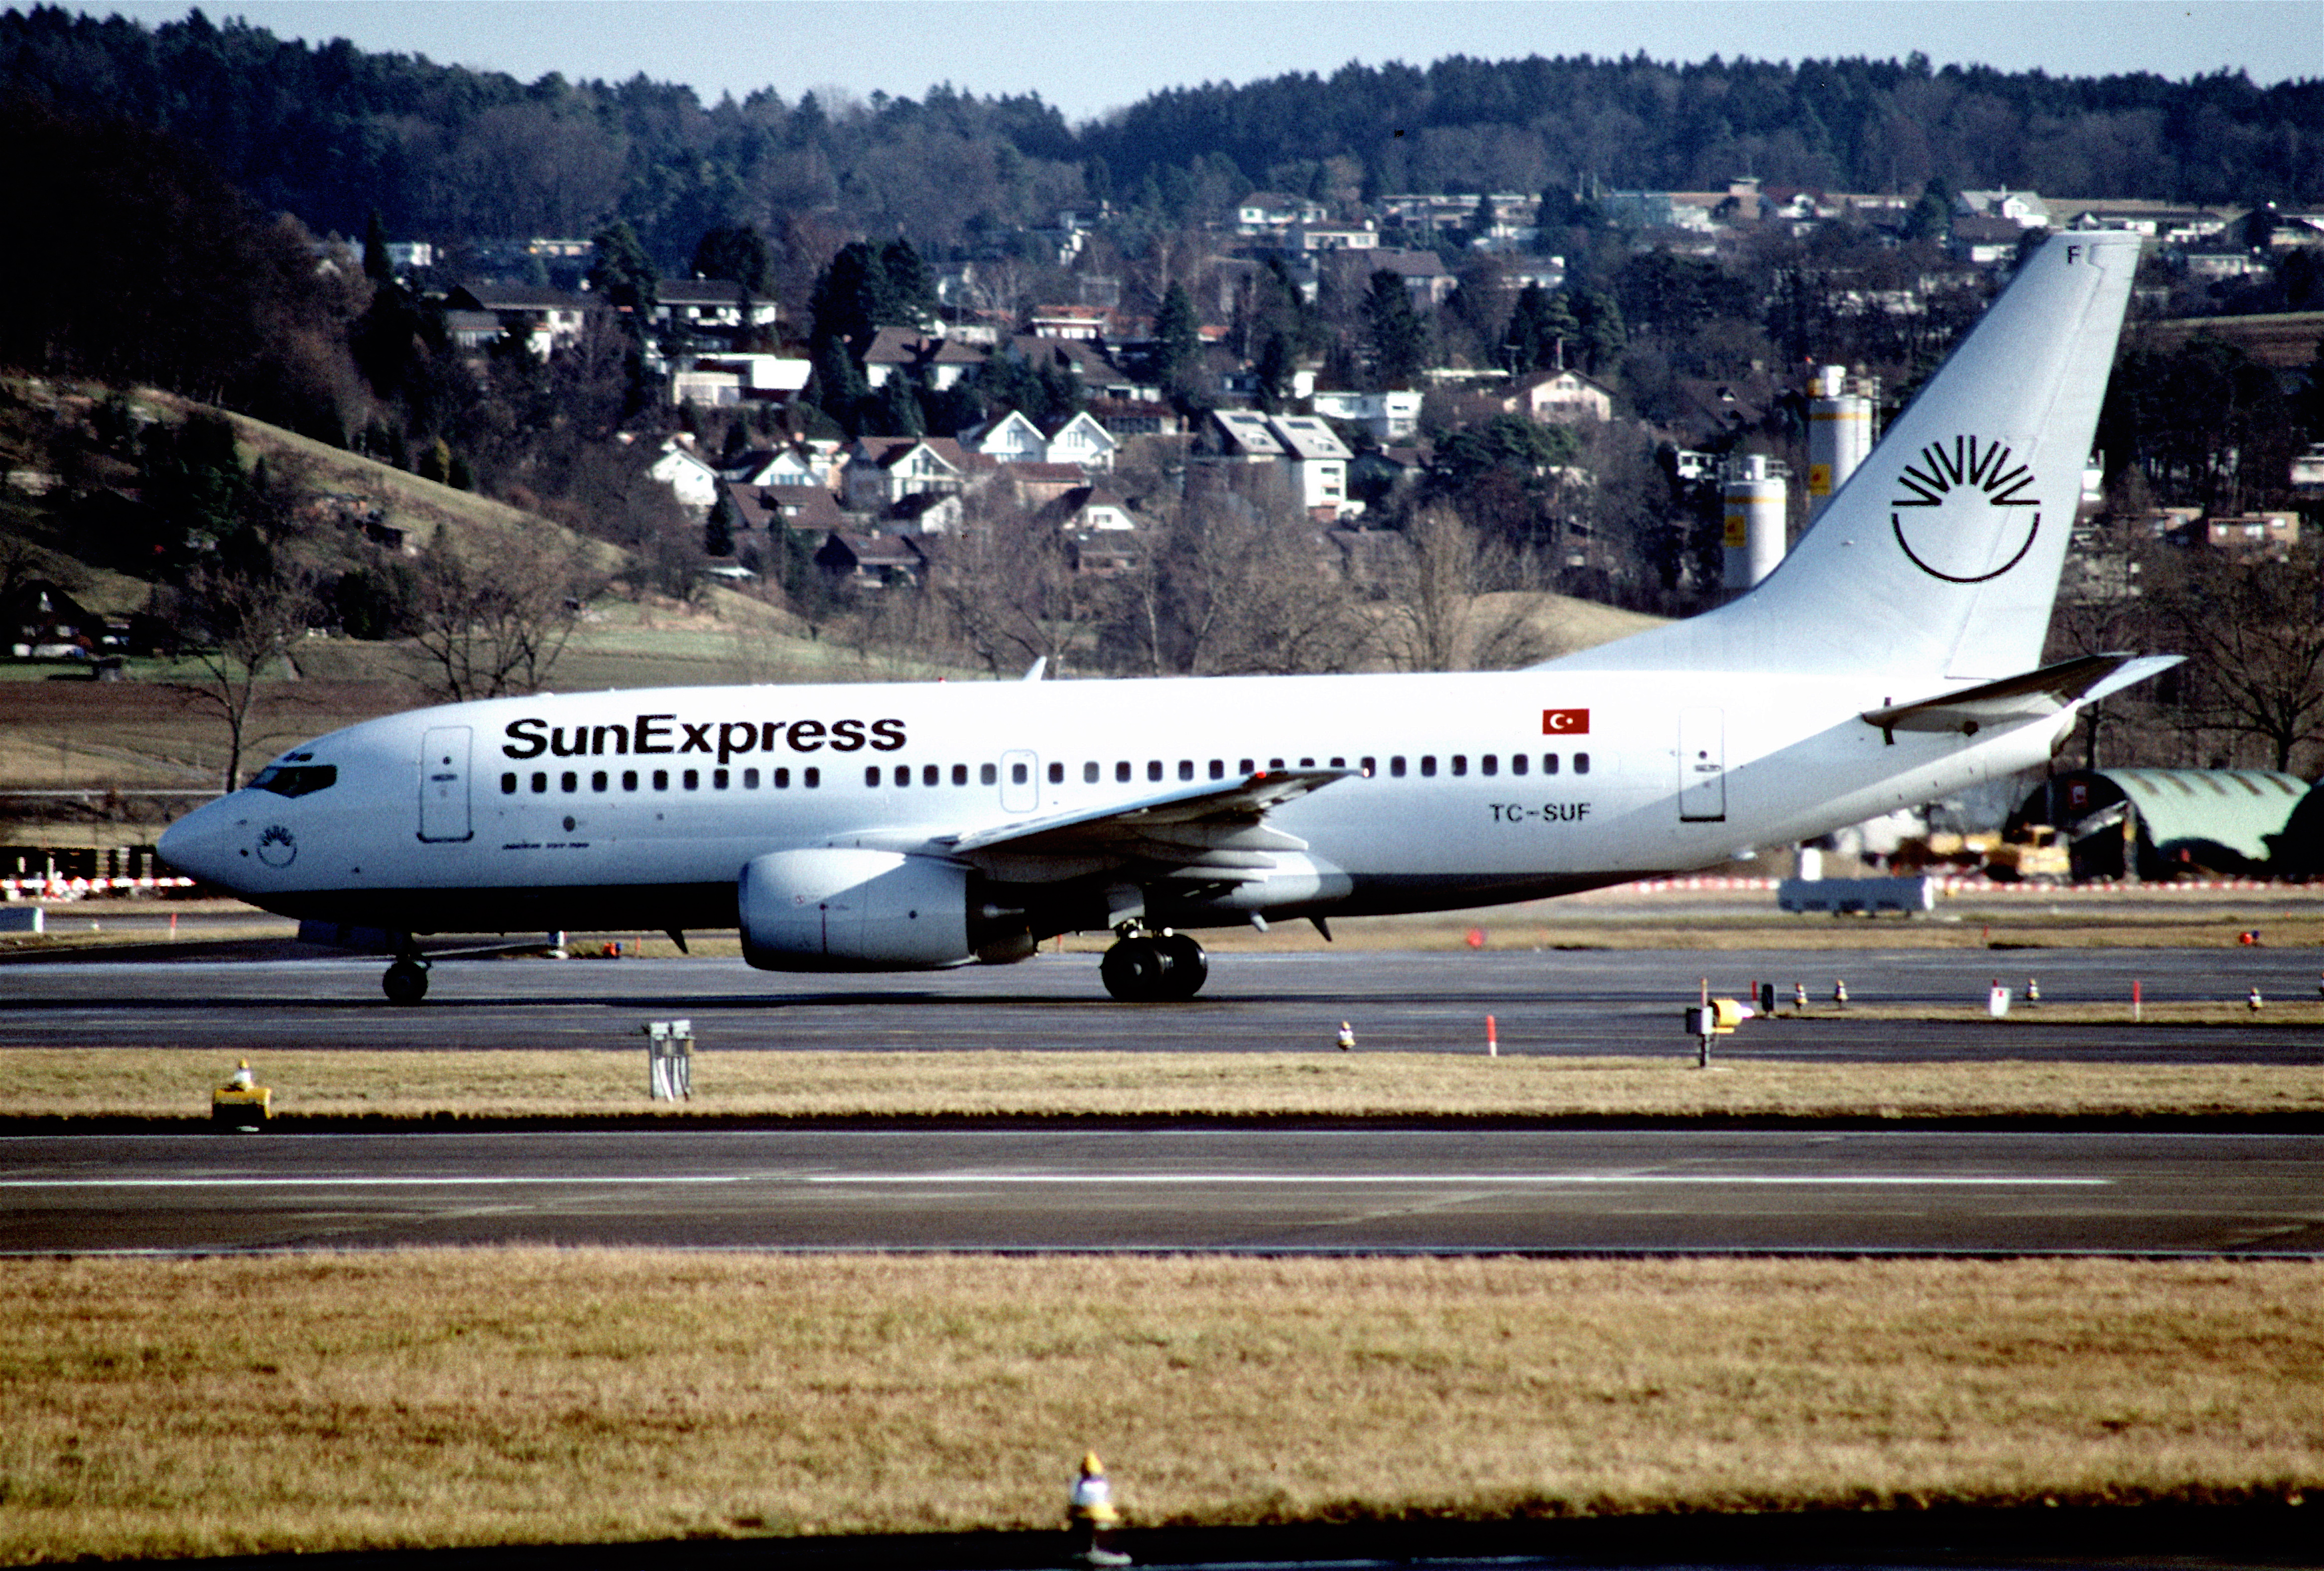 Commons:A. 161ad - SunExpress Boeing 737-73S, TC-SUF@ZRH,26.01.2002 - Flick...